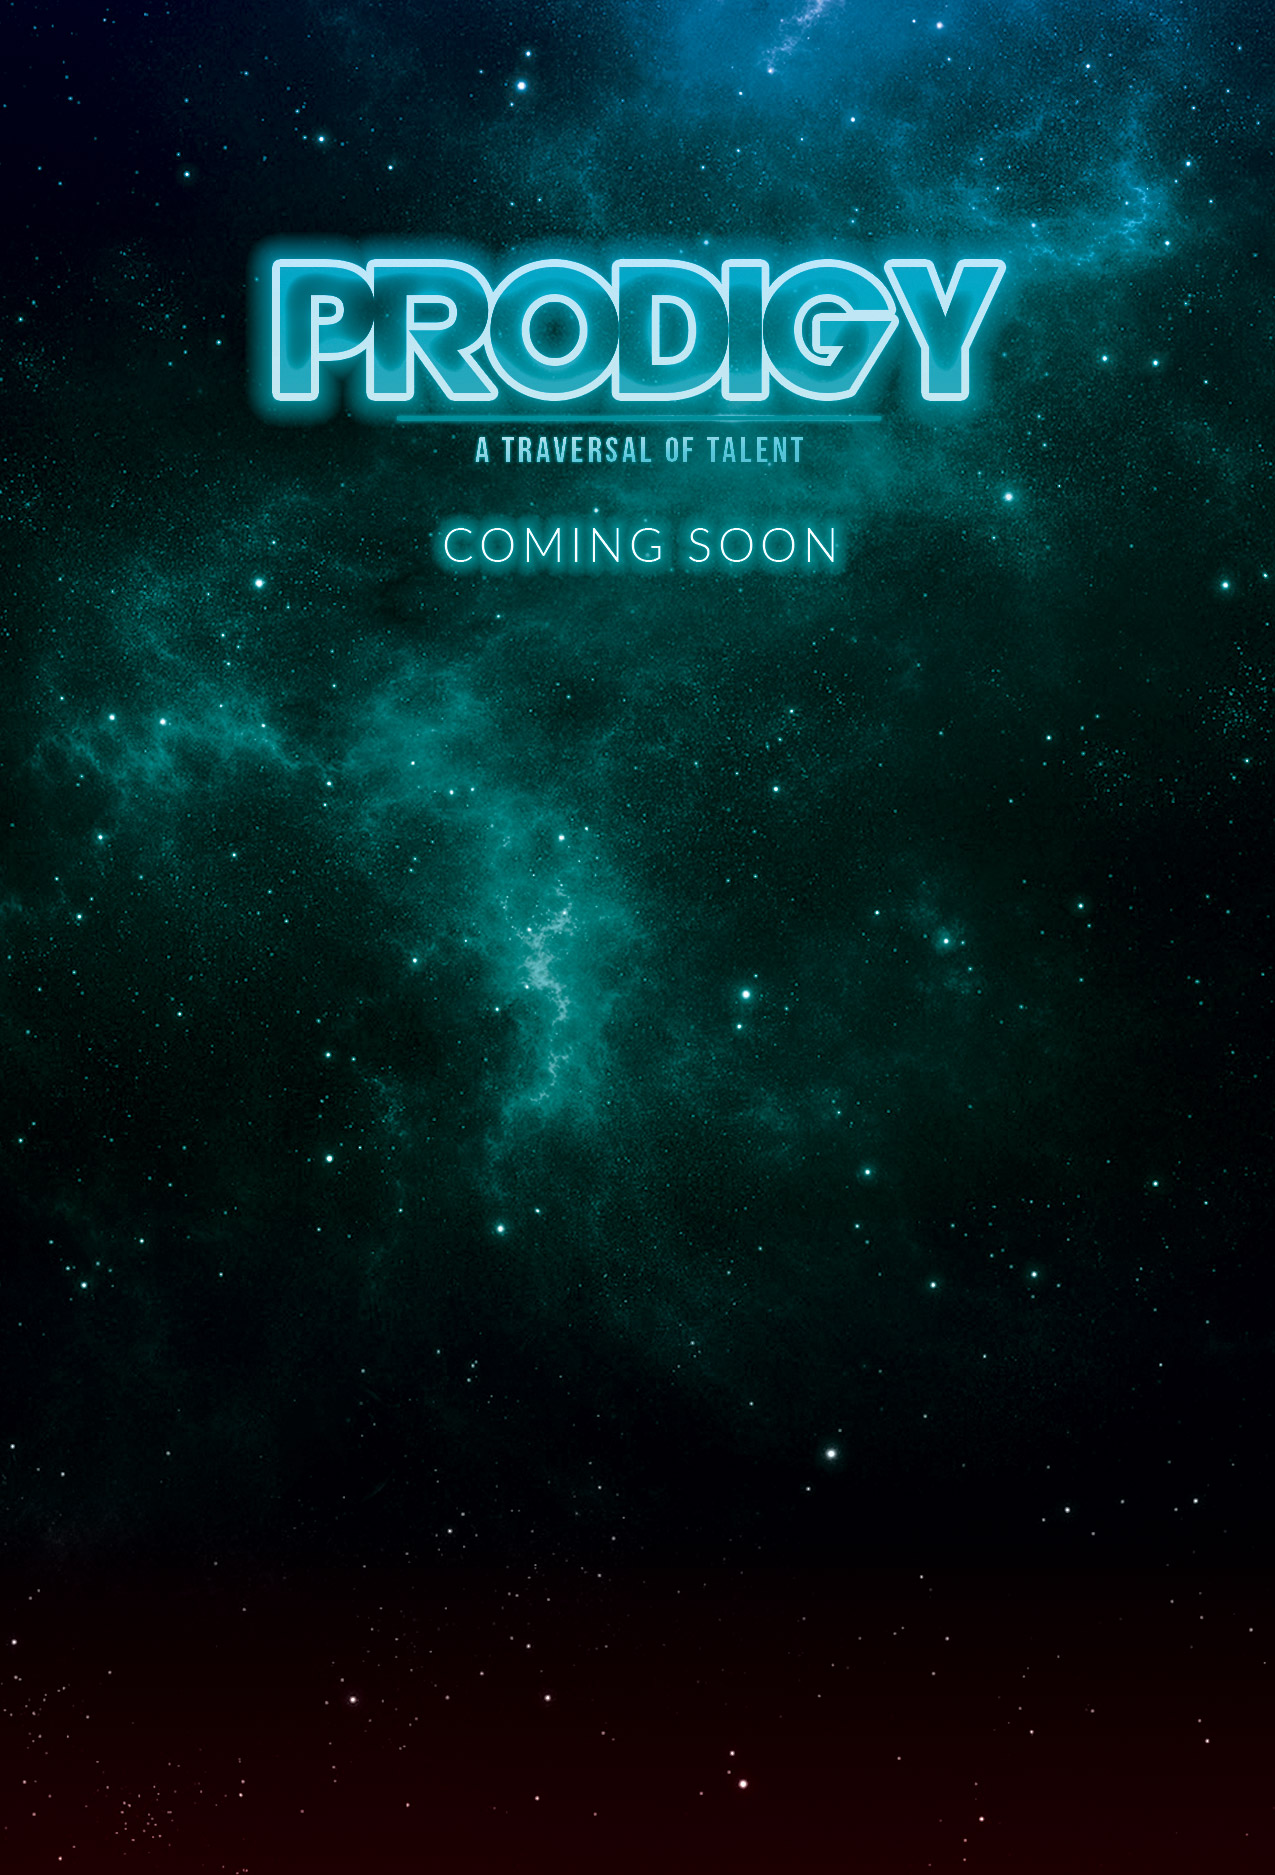 PRODIGY 2016 | Coming Soon